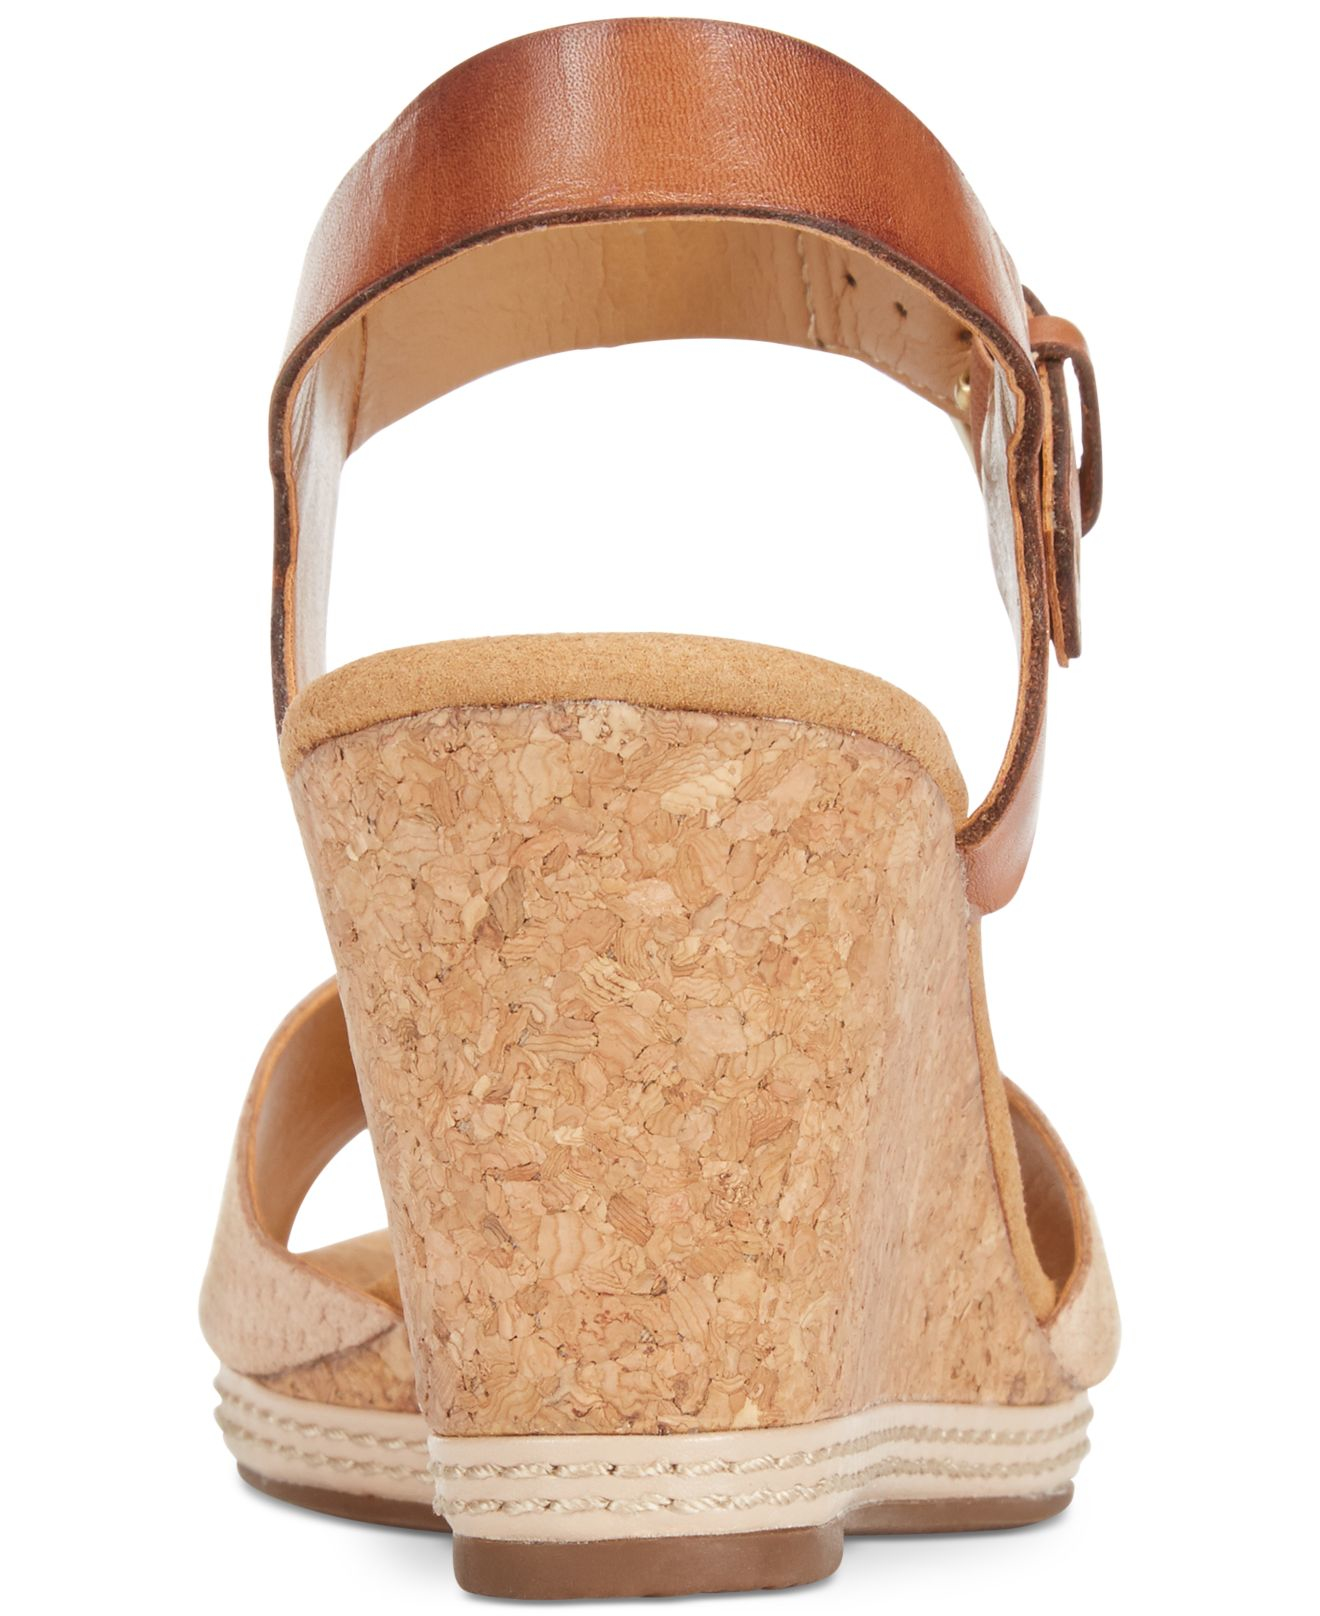 Clarks Leather Cork Wedge Sandals Helio Latitude Size 10 Color is Nude 